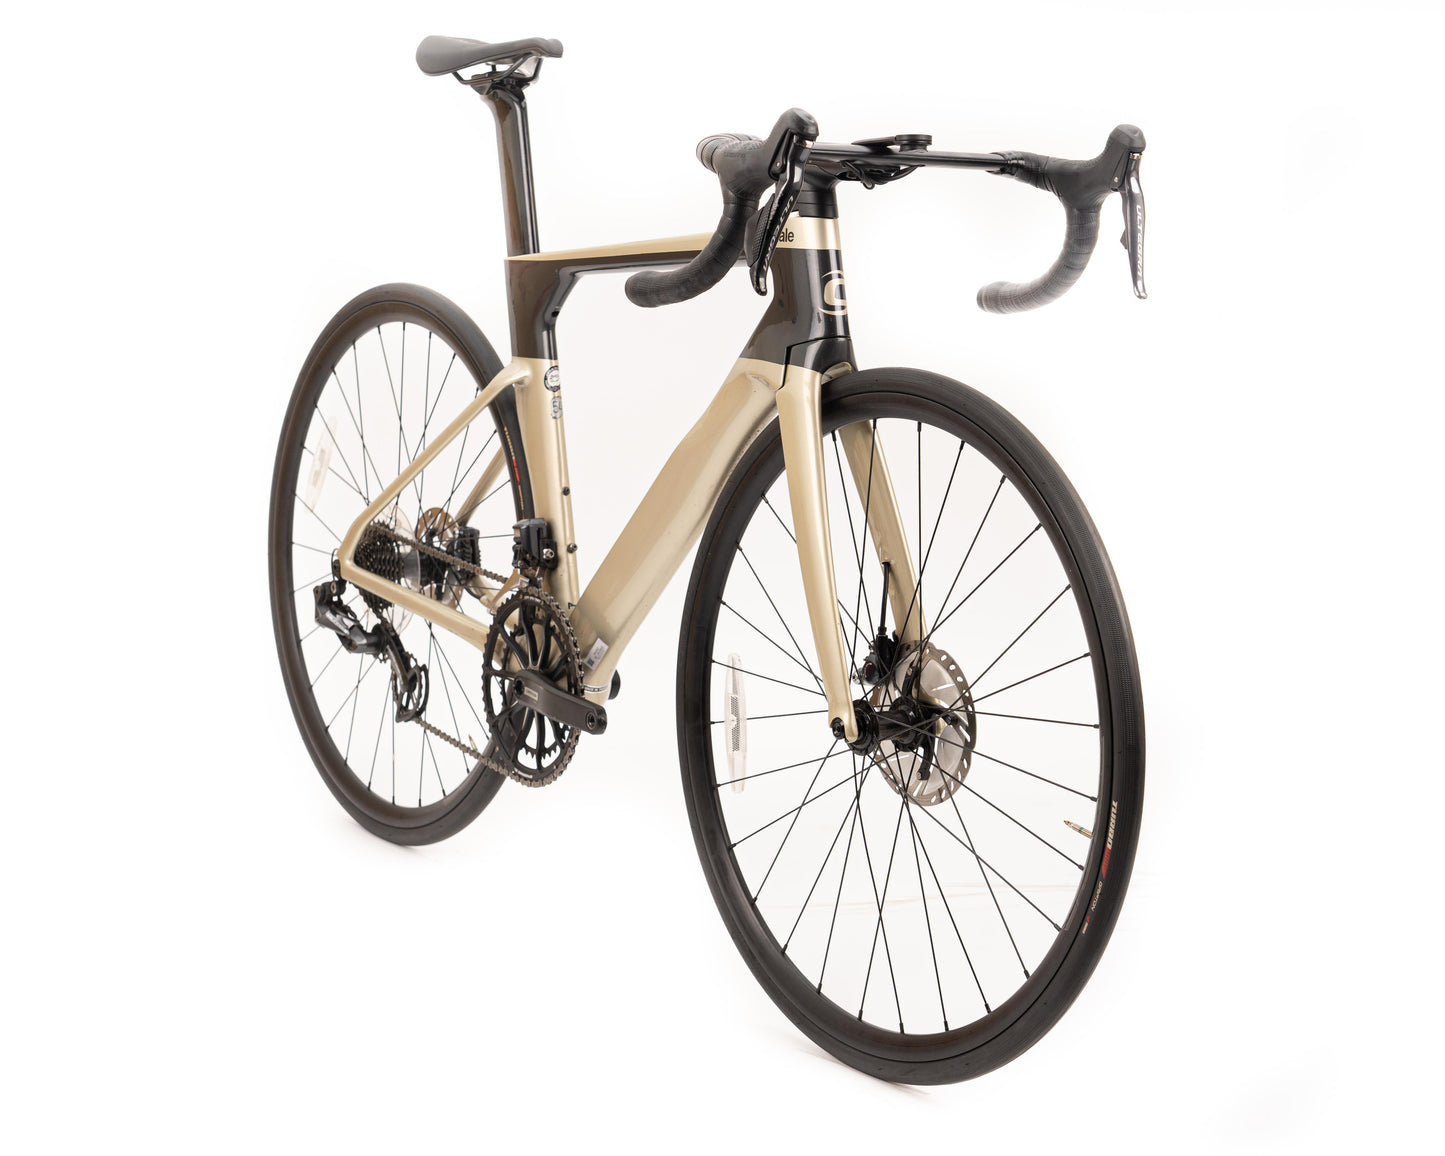 2021 Cannondale 700 M SystemSix HM Champagne 54 (CPO)